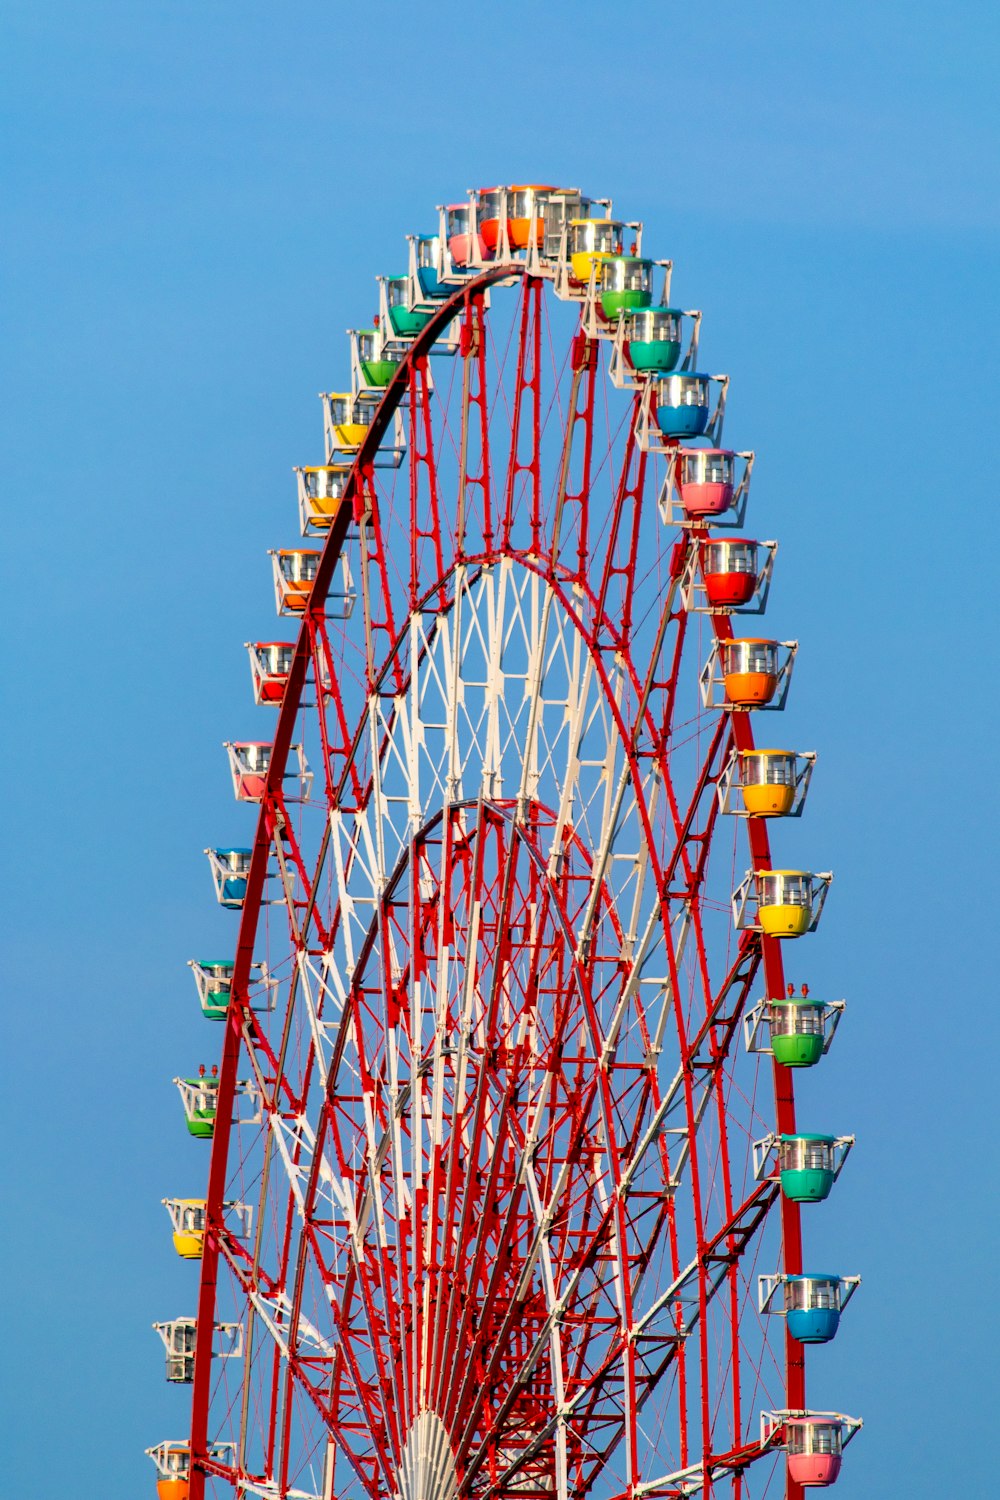 red and yellow ferris wheel under blue sky during daytime